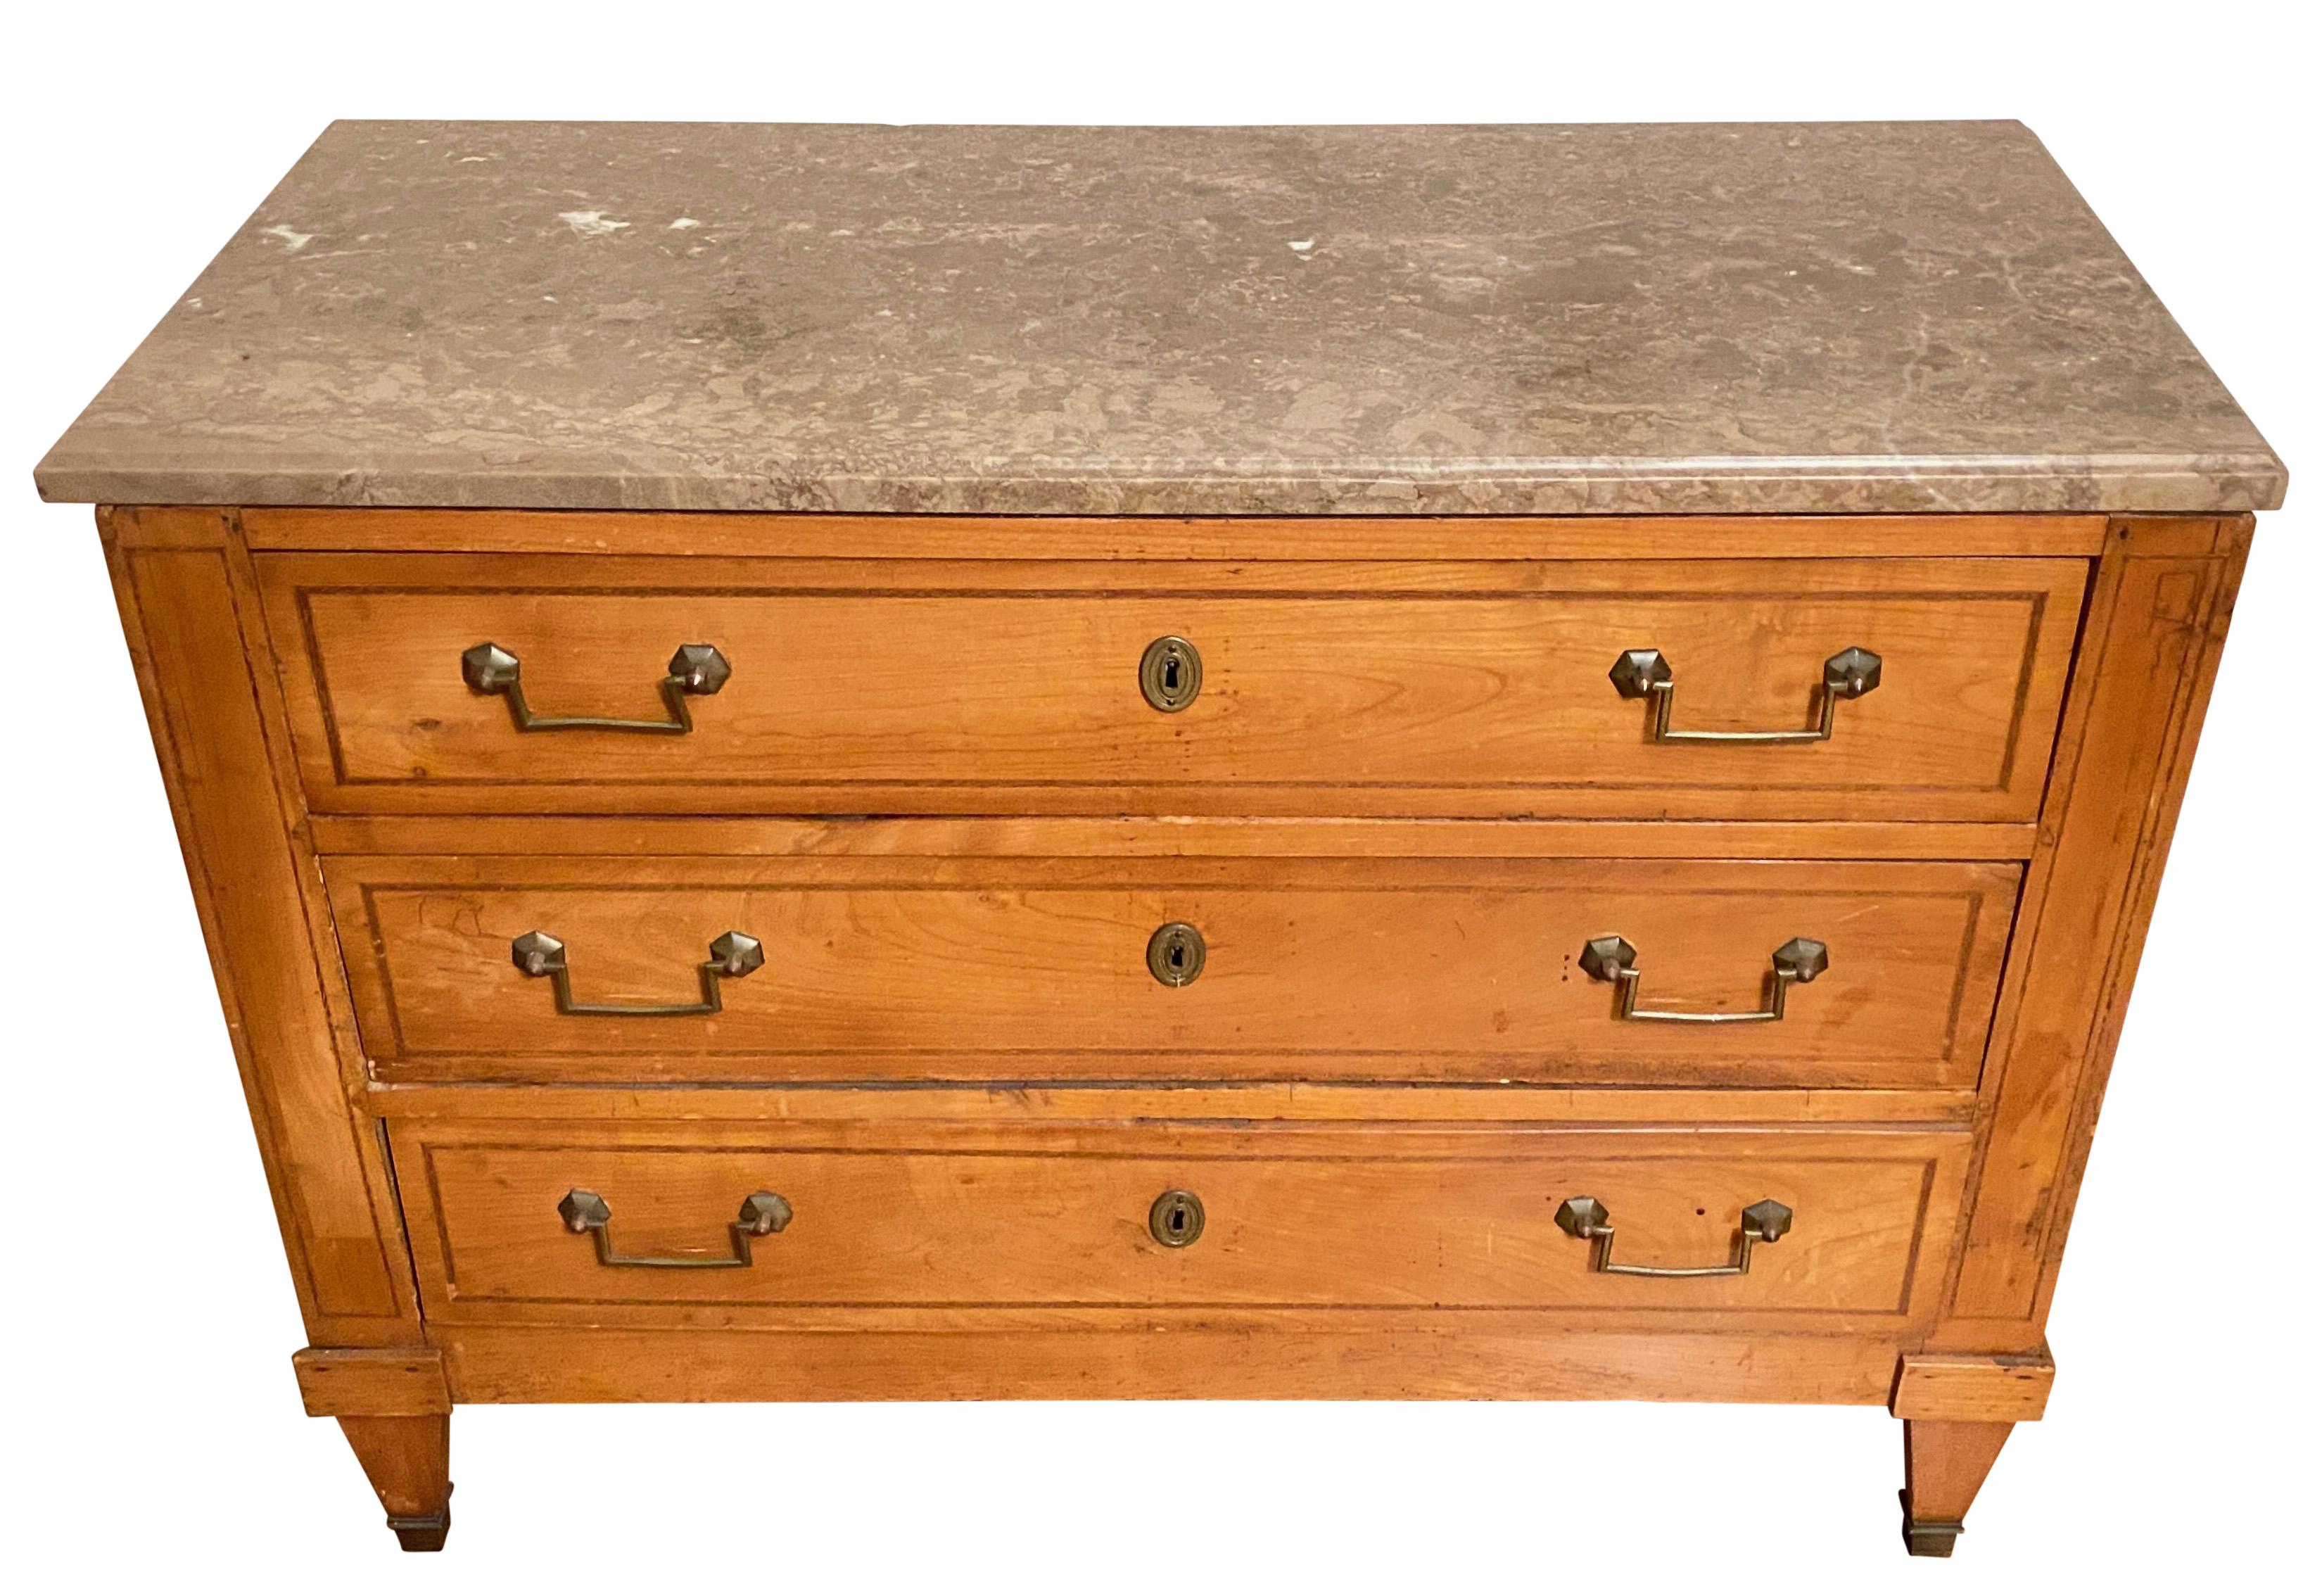 A fine 18th century French Louis XVI cherry wood commode or chest of drawers. Having three drawers with original brass hardware and original marble top. Nice proportions with classic style. 
Please note on either side there is natural occurring